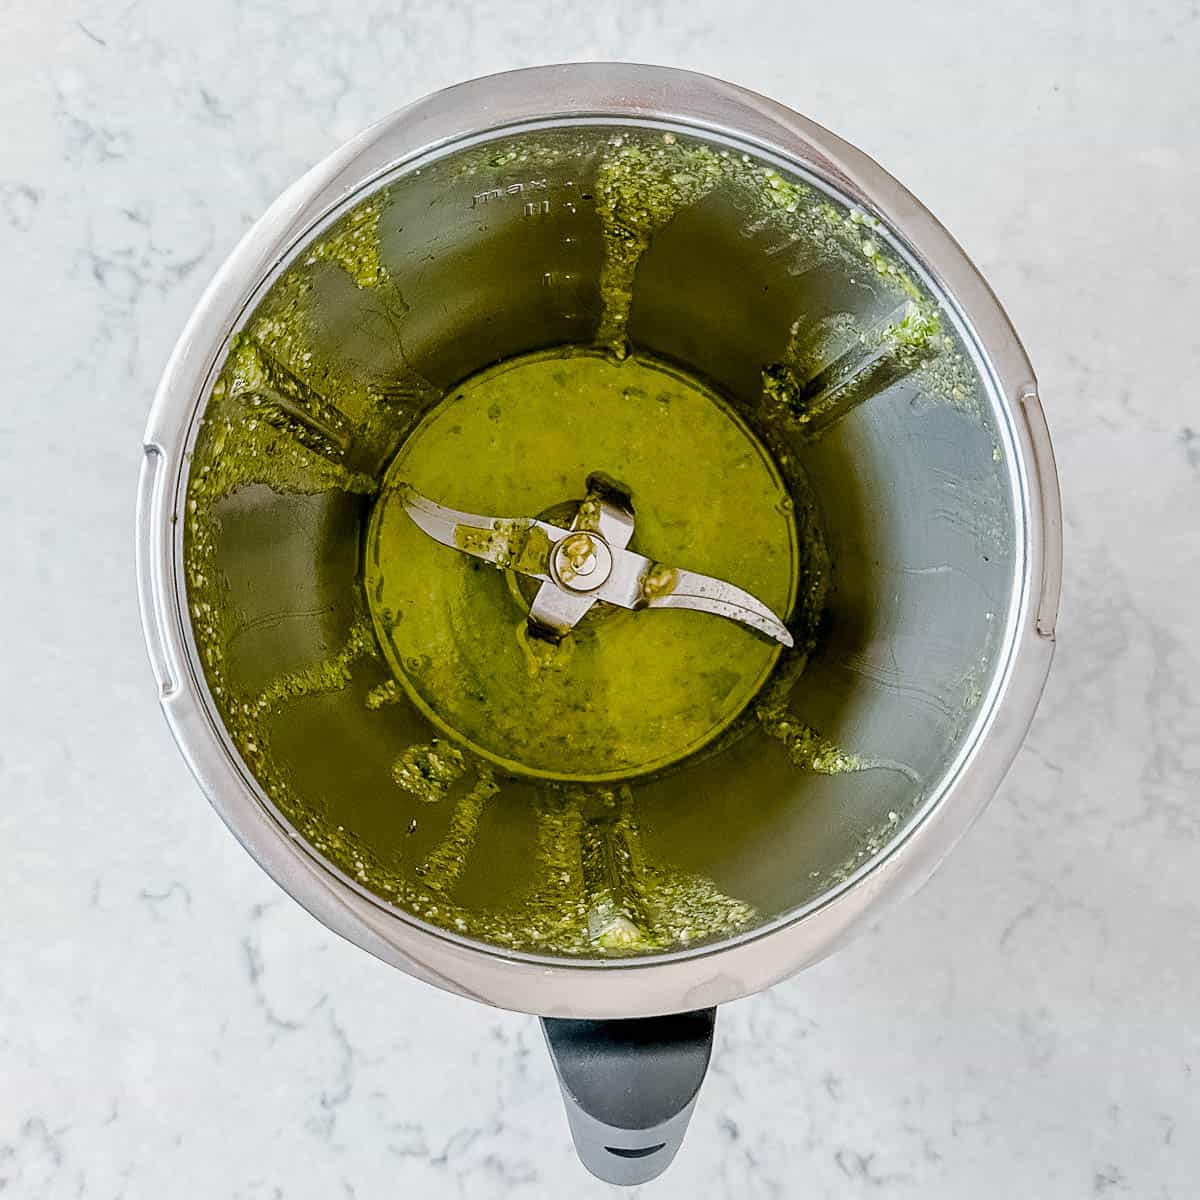 An image of Pesto being made in the Thermomix.